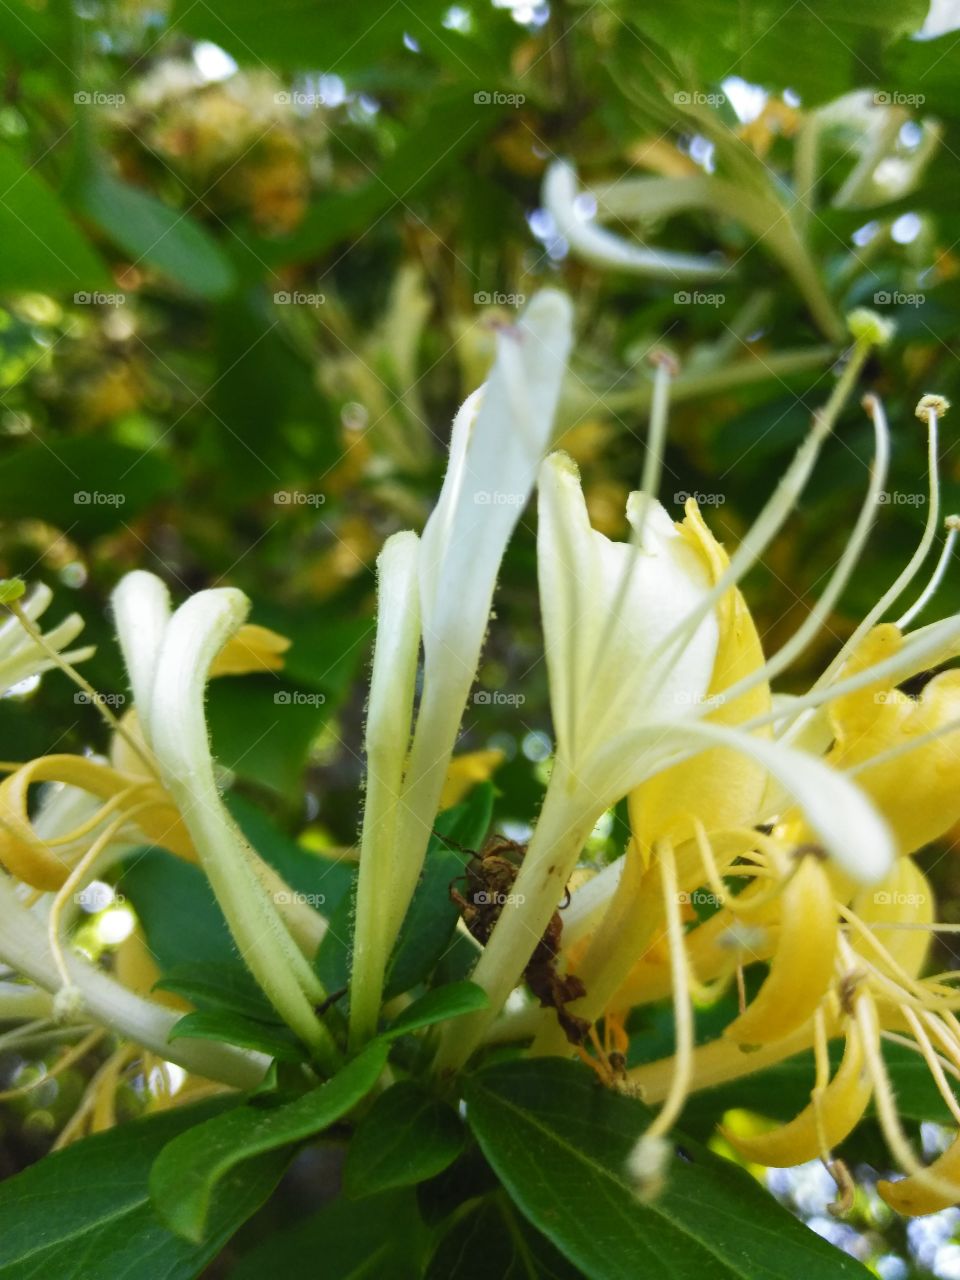 A fairly large bush of wild southern honeysuckle growing at a community ballfield fence. The aroma was simply Devine.